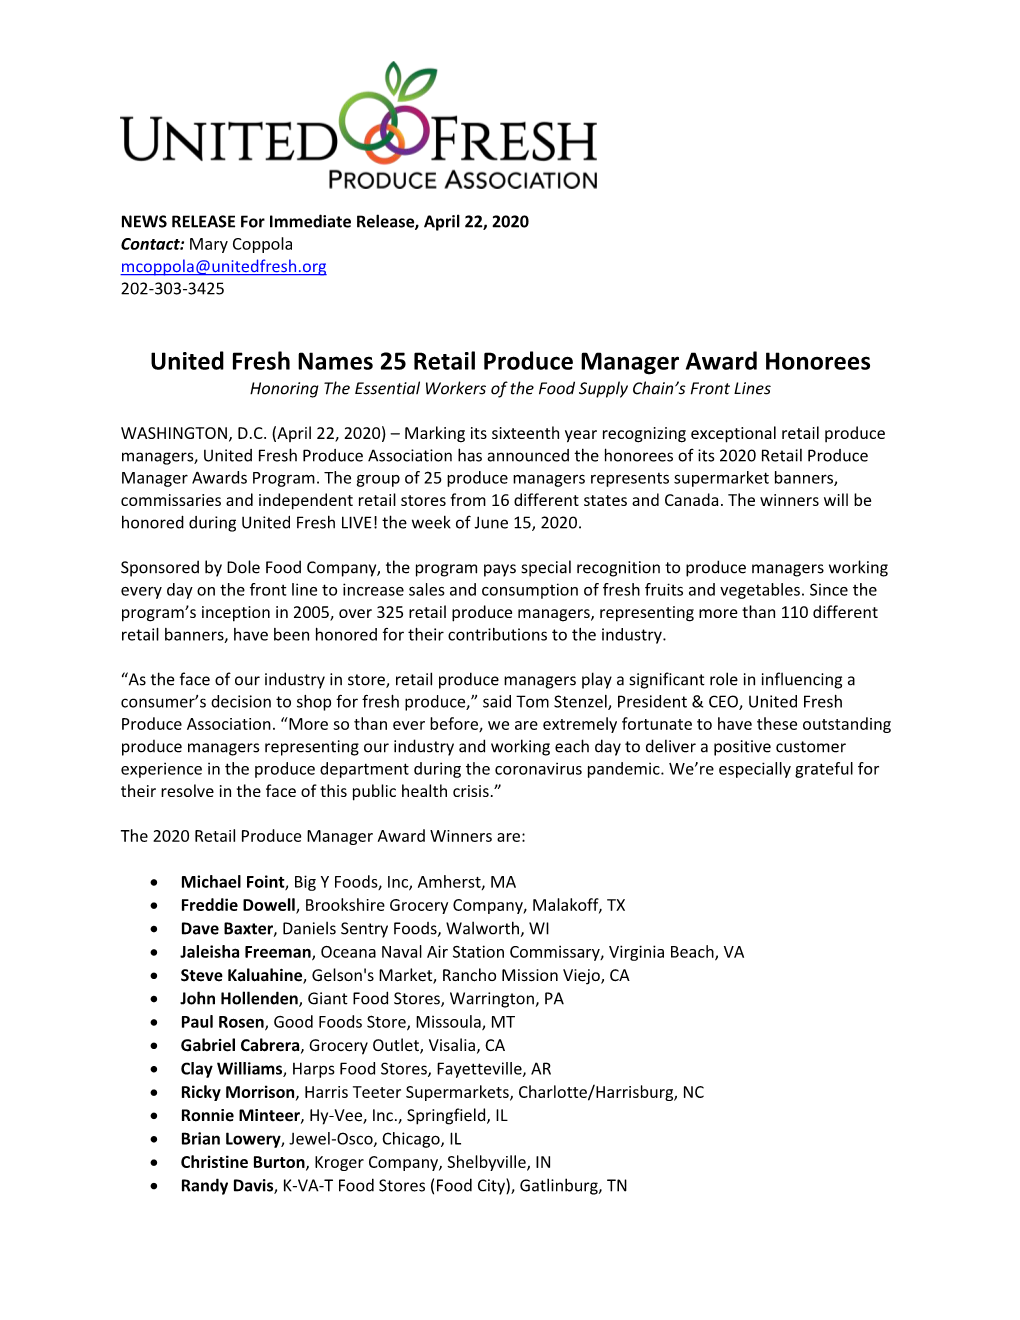 United Fresh Names 25 Retail Produce Manager Award Honorees Honoring the Essential Workers of the Food Supply Chain’S Front Lines